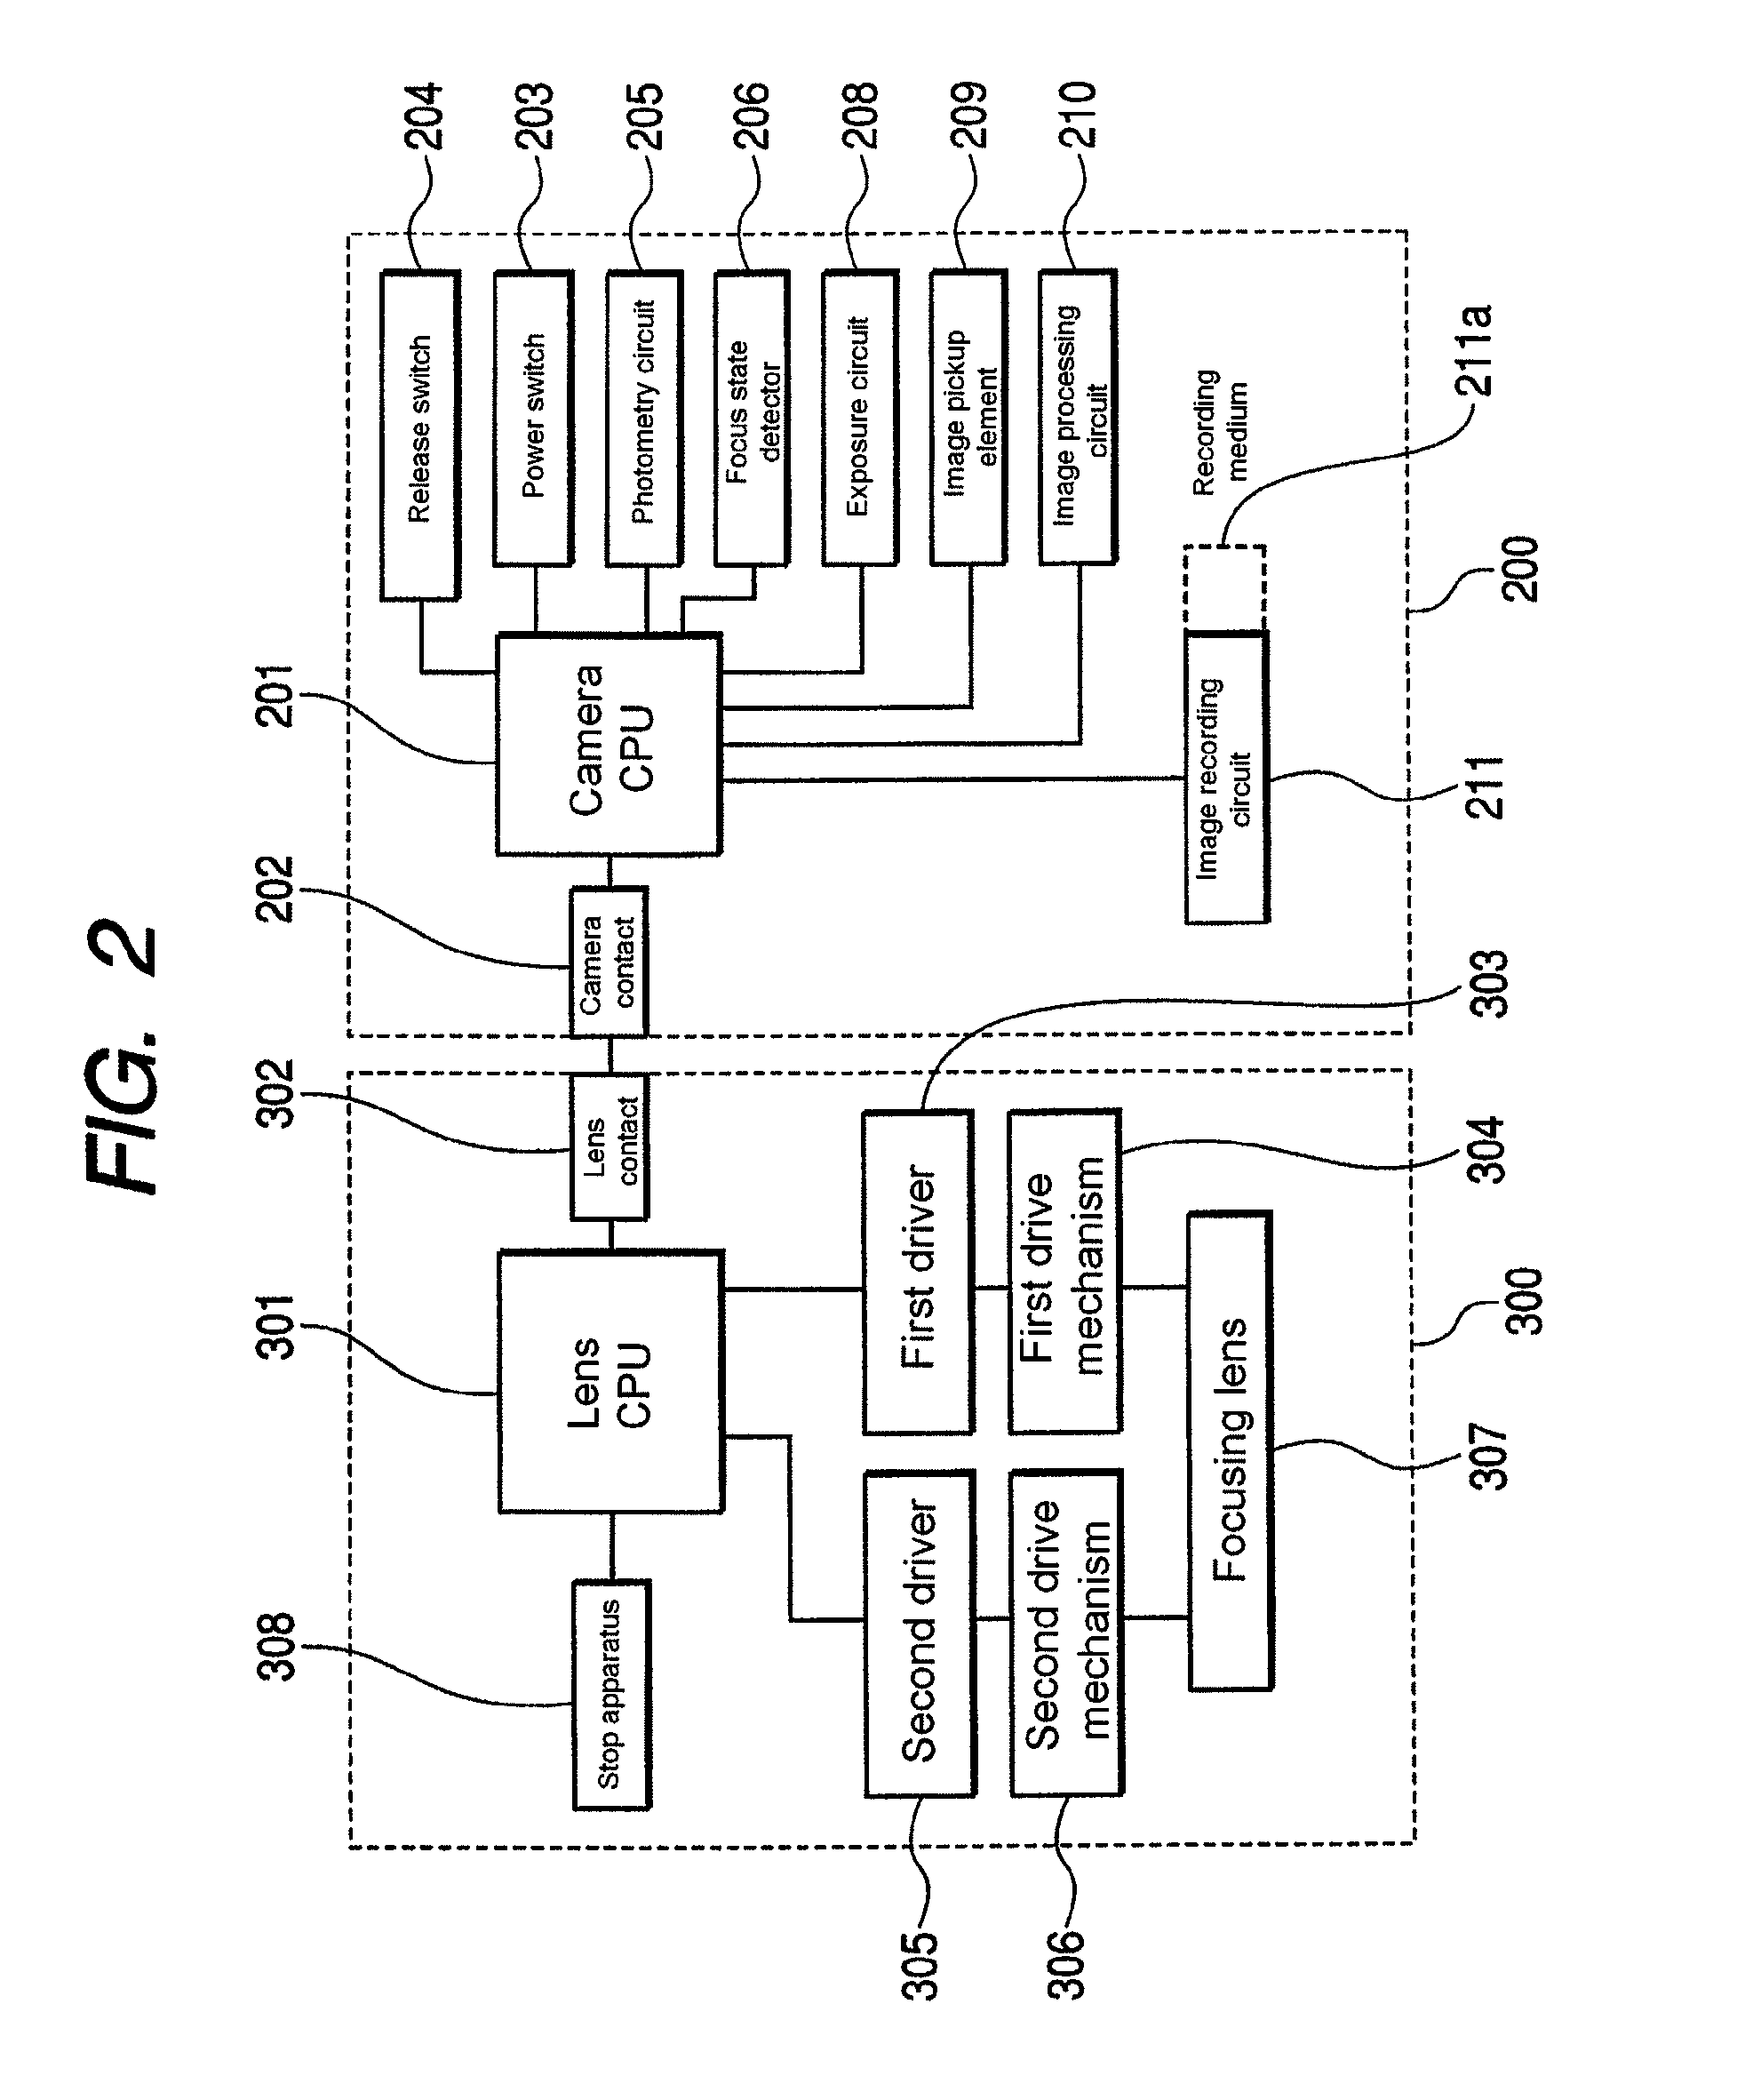 Detachable lens apparatus, camera system and camera for accurate automatic focusing using two driving mechanisms